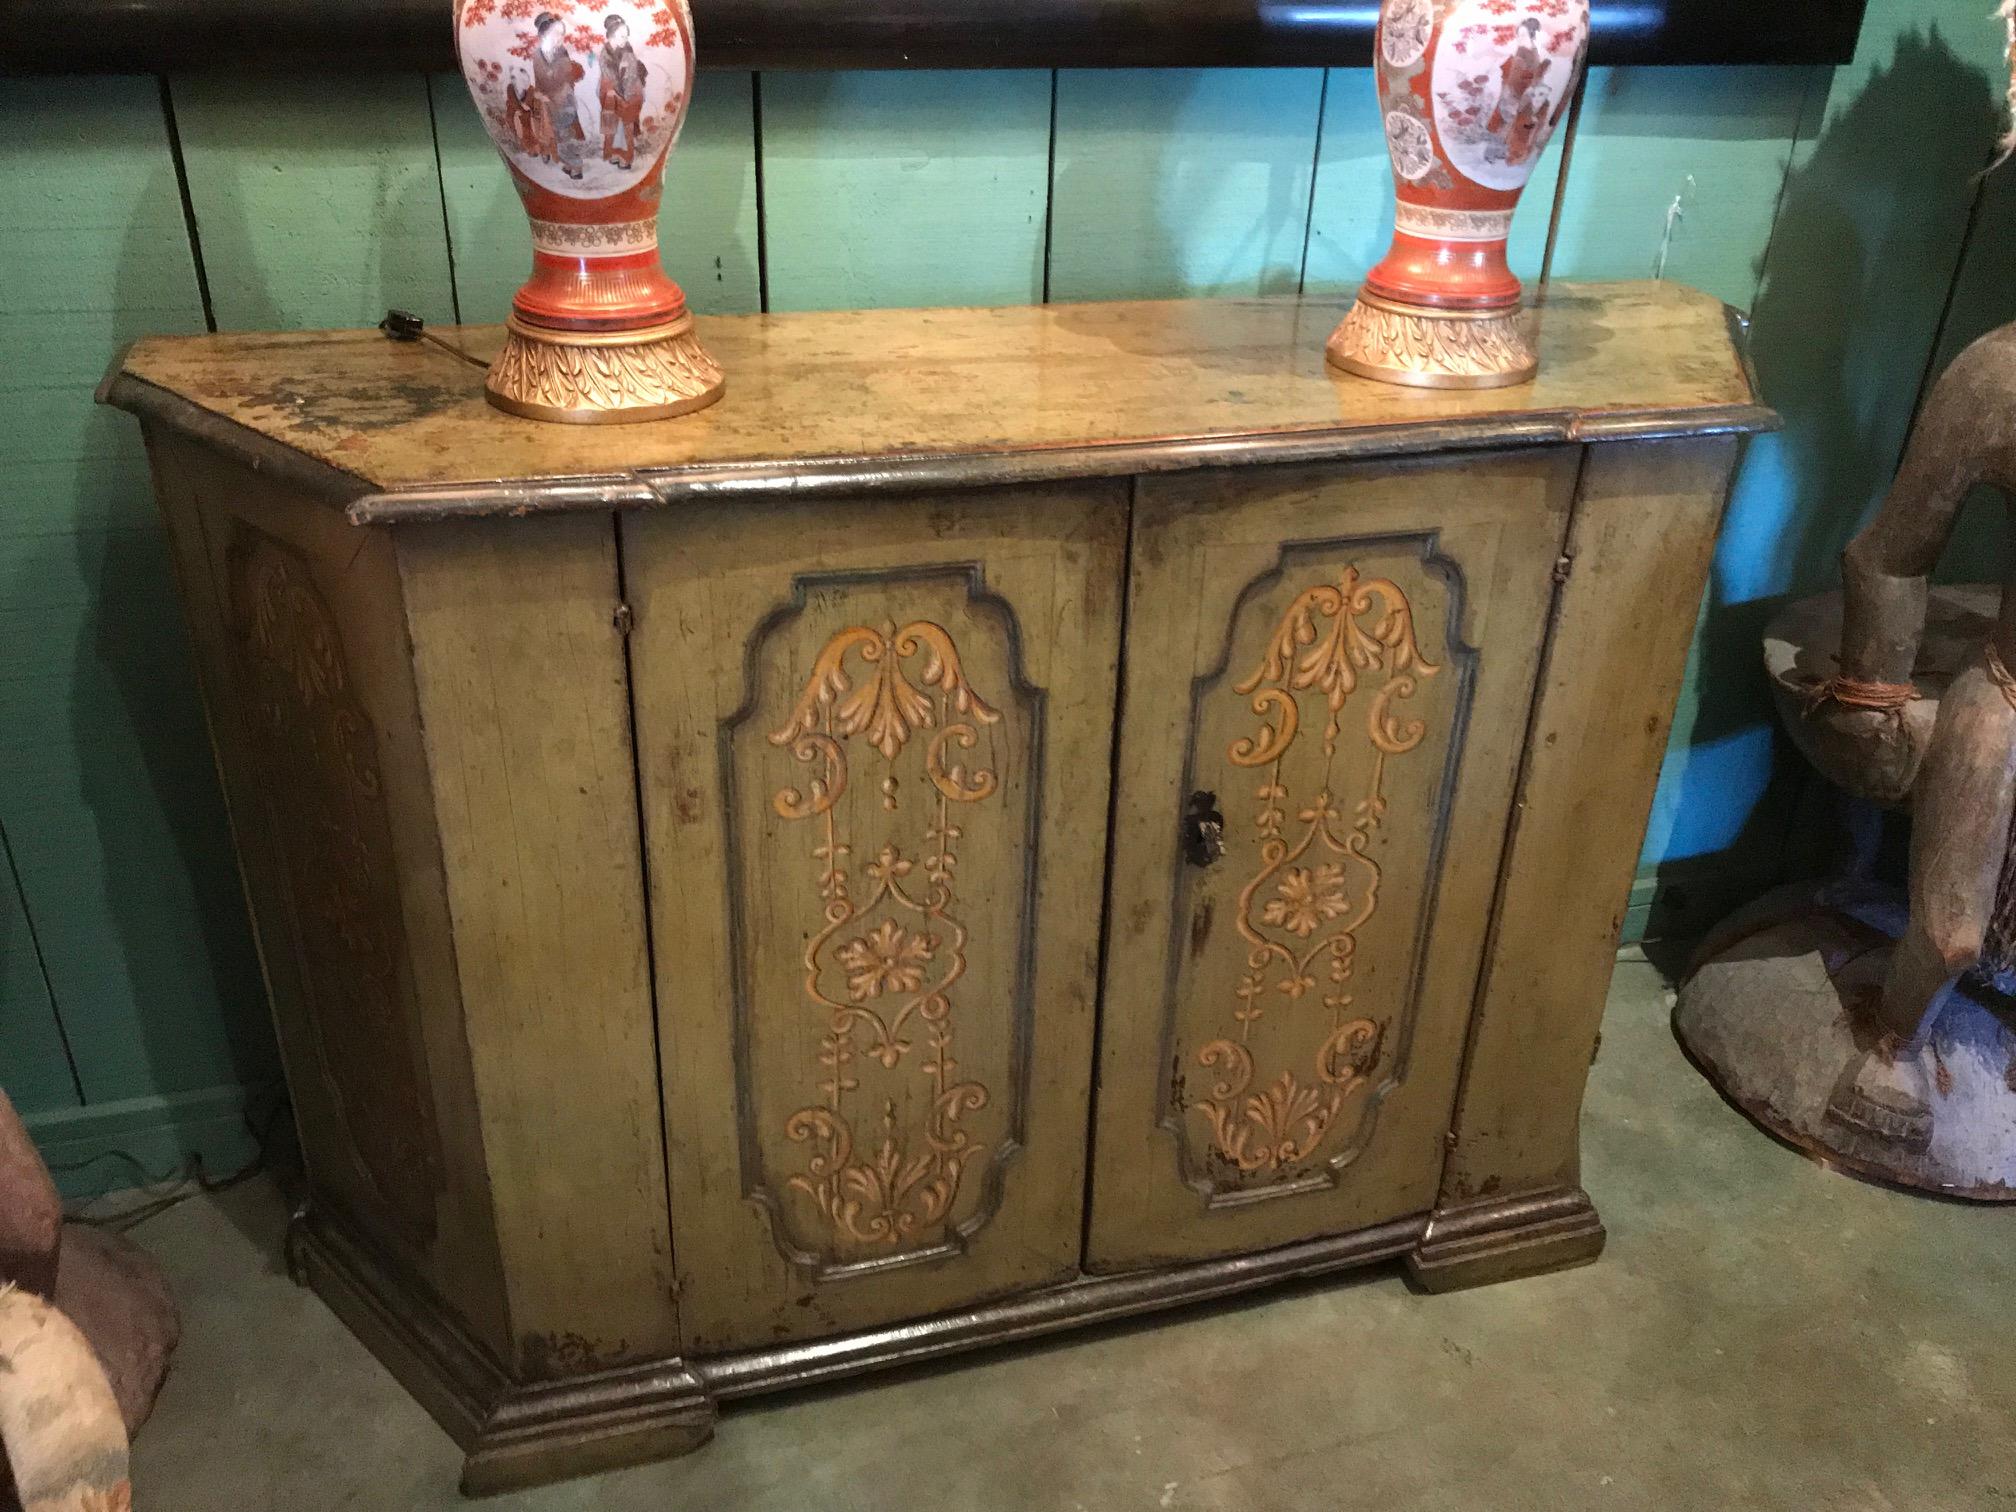 A good late 17th century-early 18th century Tuscan baroque polychrome decorated credenza cabinet 2 doors. 17.5